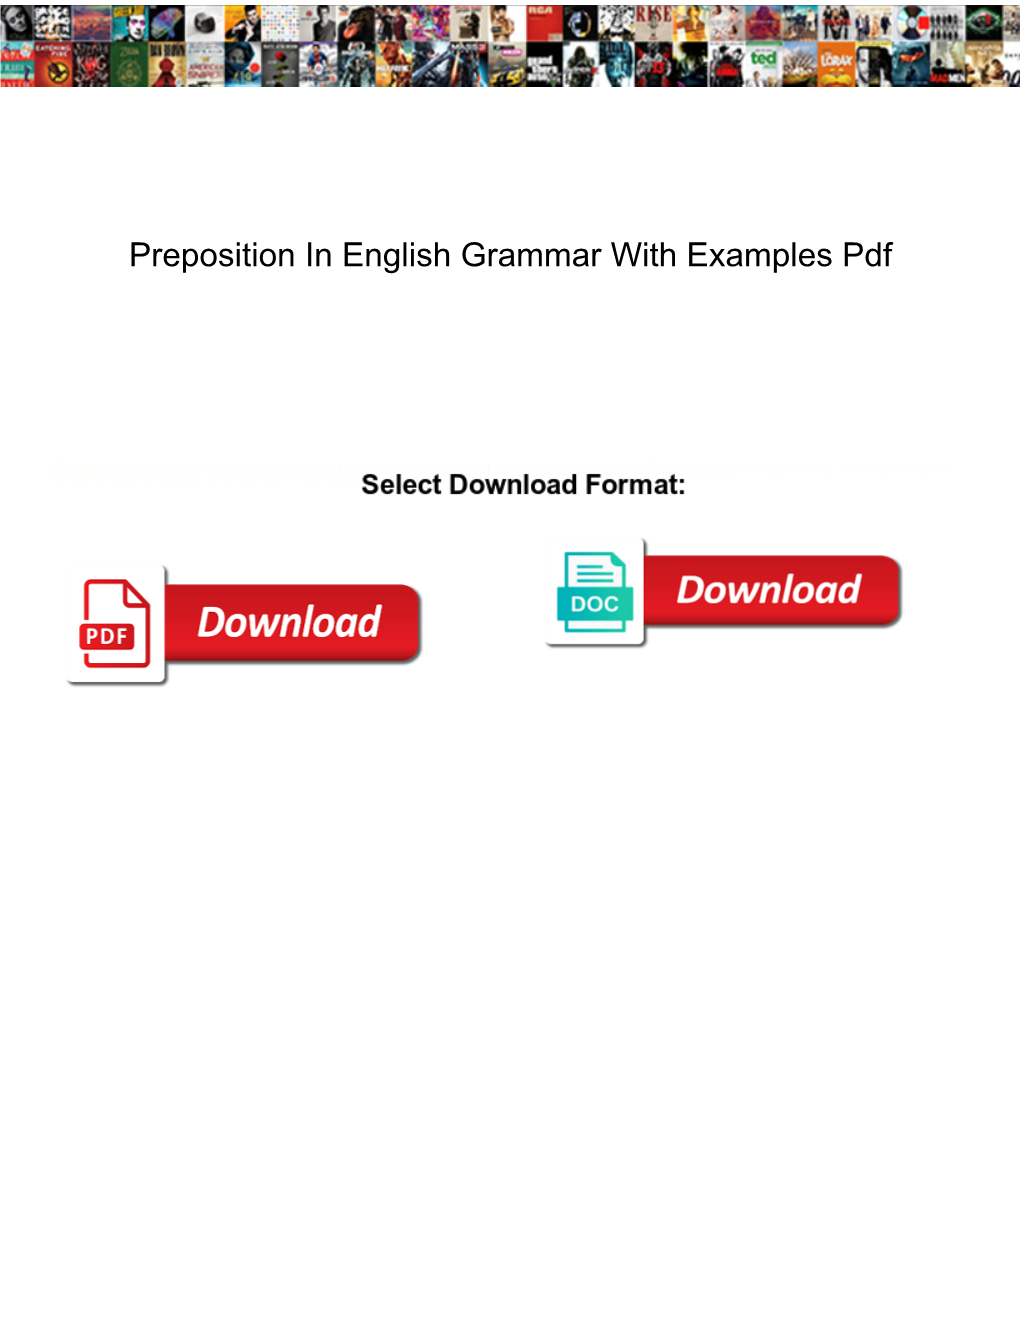 preposition-in-english-grammar-with-examples-pdf-docslib